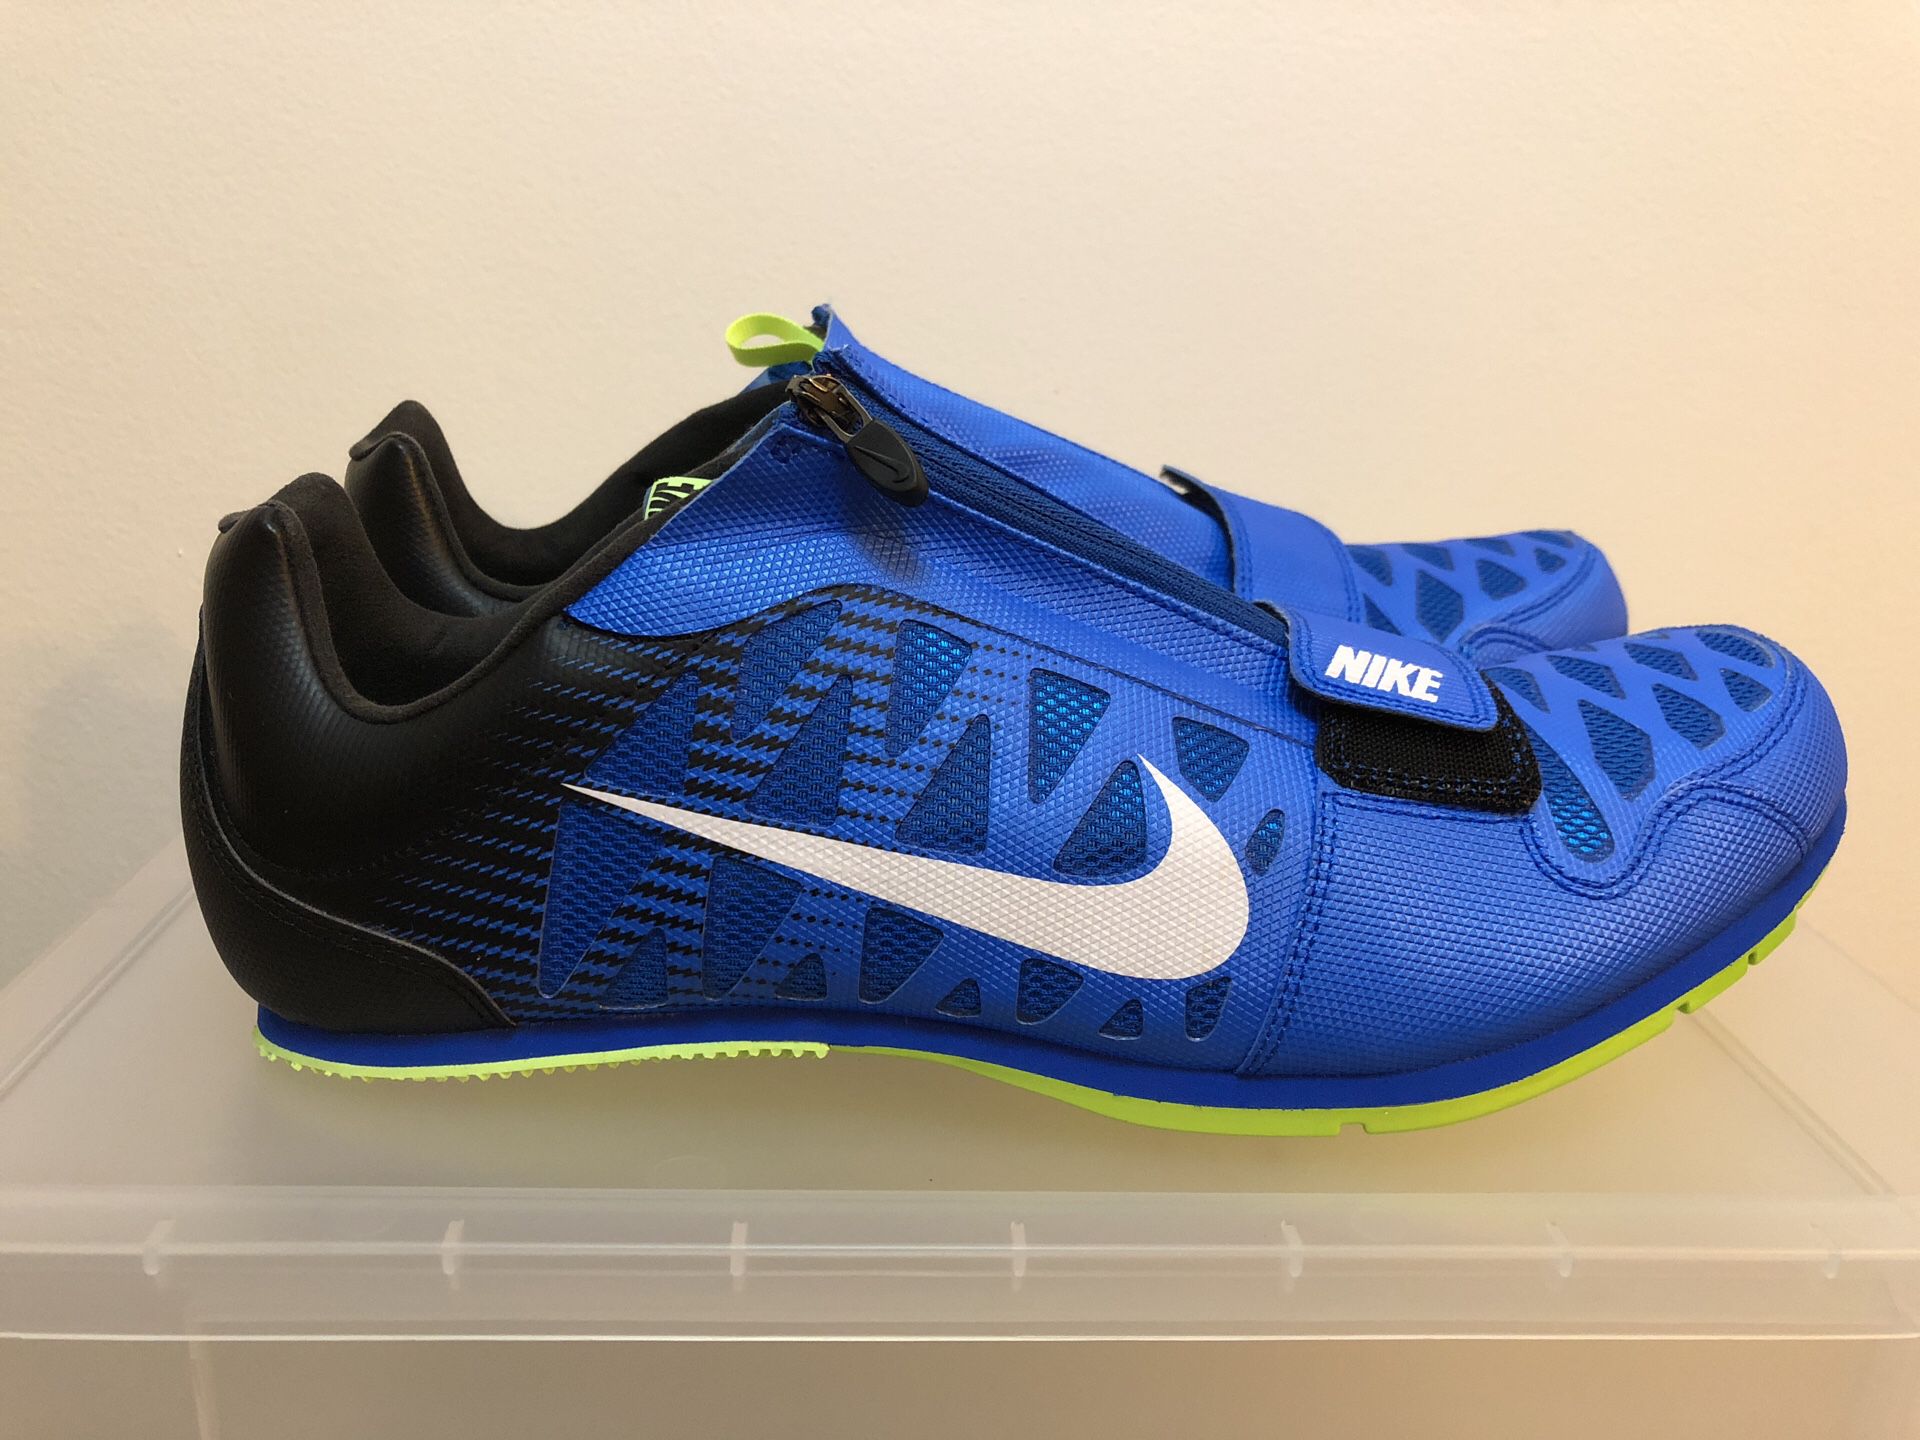 Cambiable Tumba pesadilla Nike Zoom LJ4 Long Jump/Track Shoes w/Spikes 415339-413 Blue/Black/Volt Sz  12.5 for Sale in Parkland, FL - OfferUp